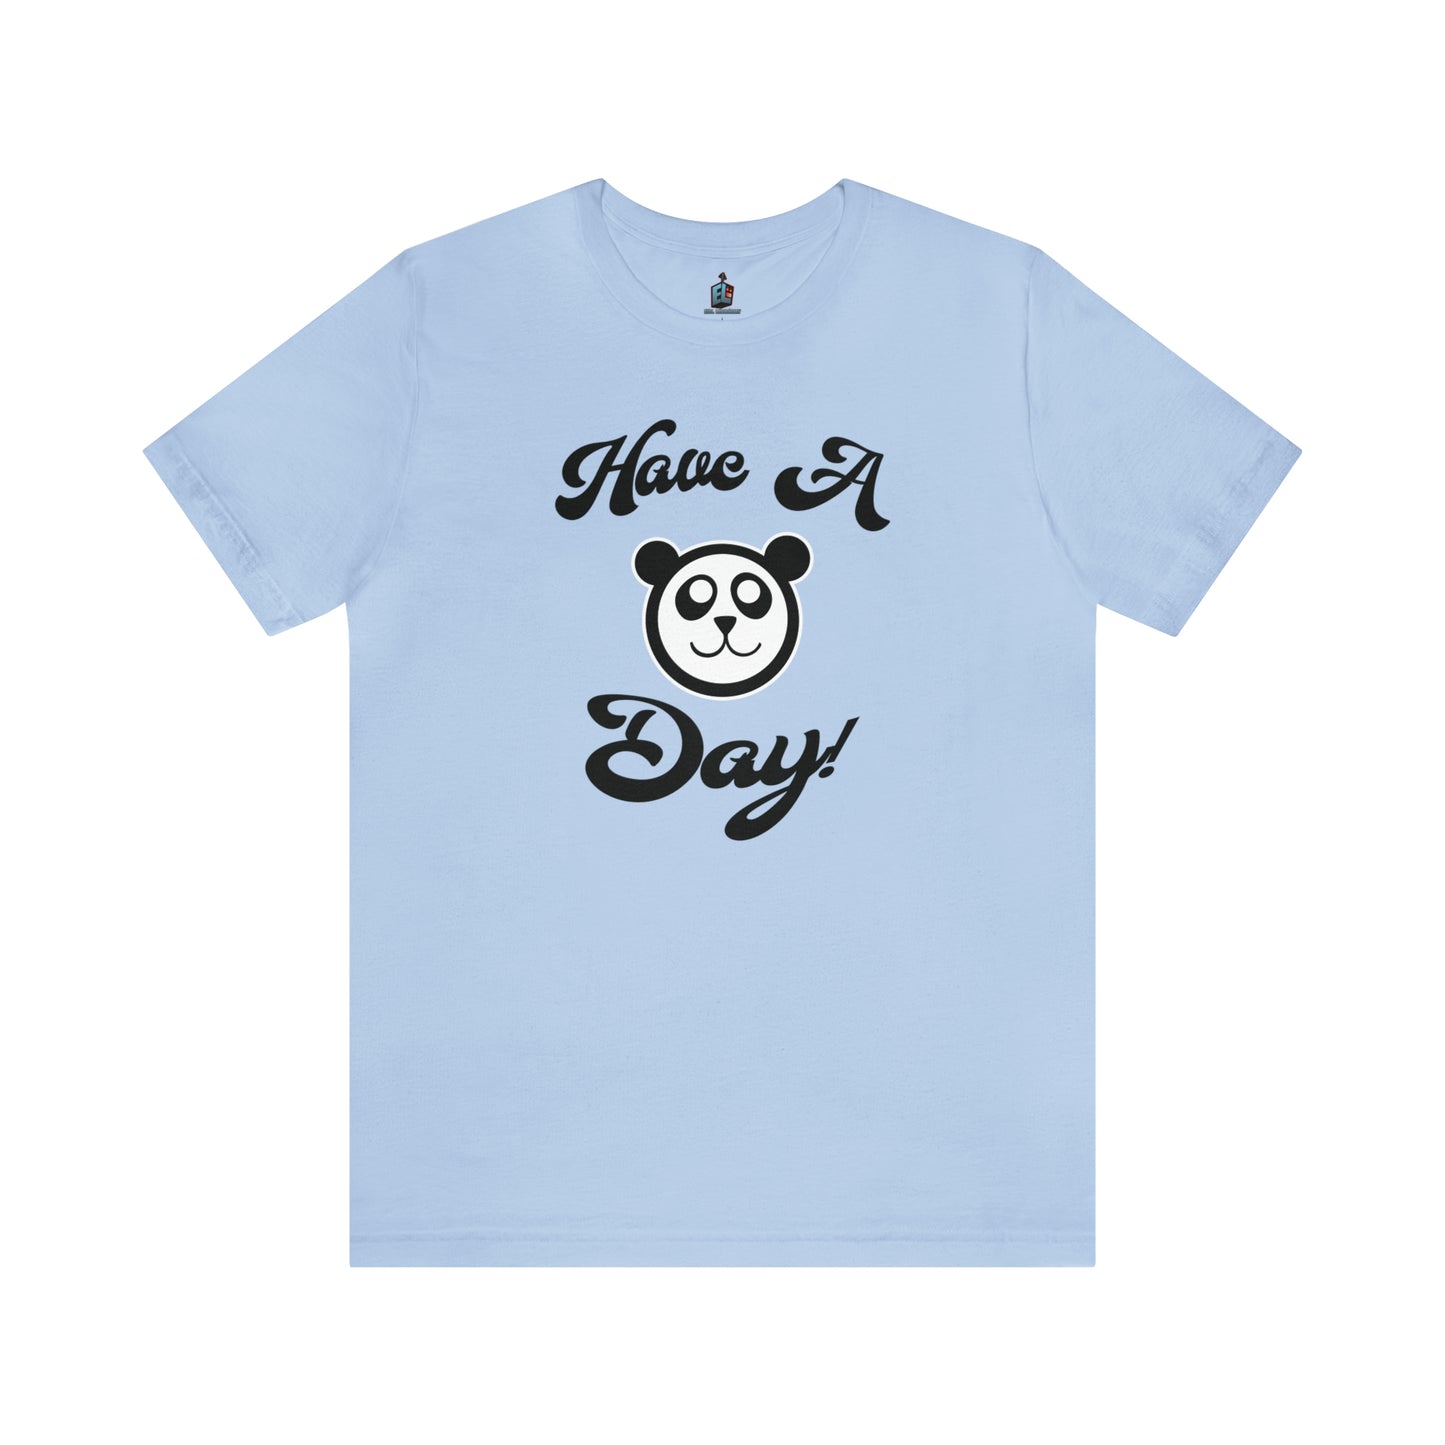 Have A Day! Premium Tee